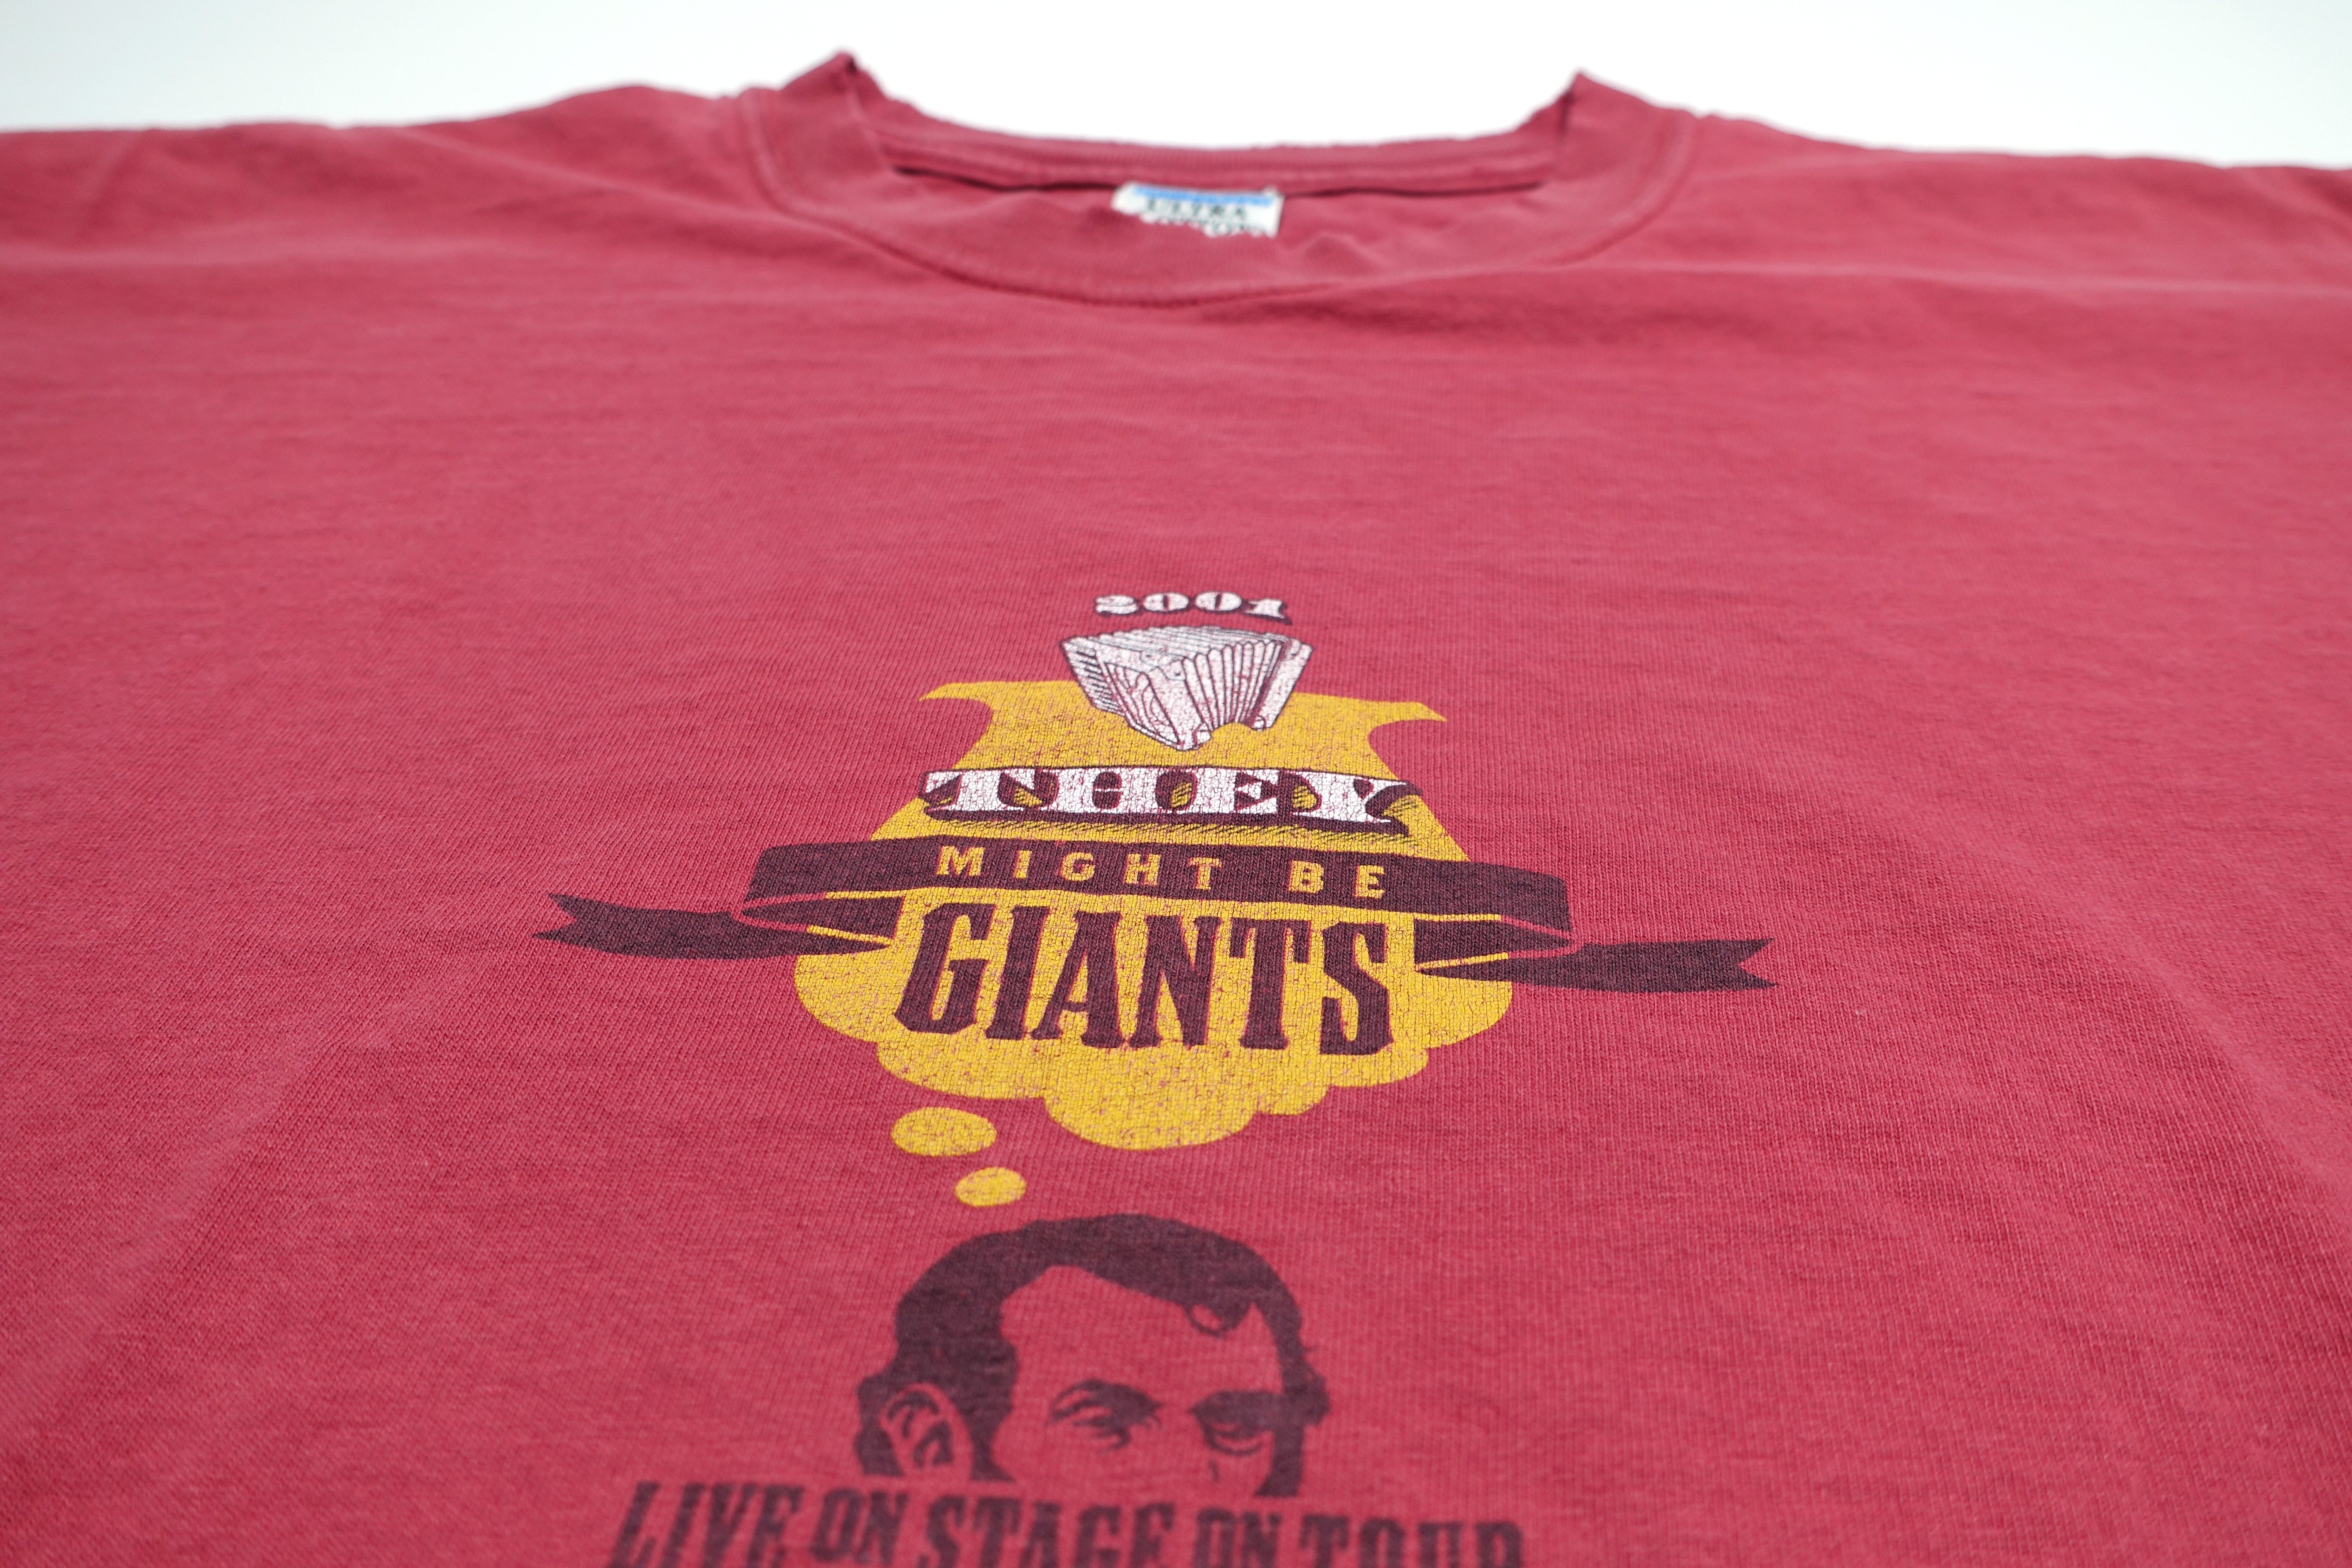 They Might Be Giants - Lincoln Theme 2001 Tour Shirt Size XL